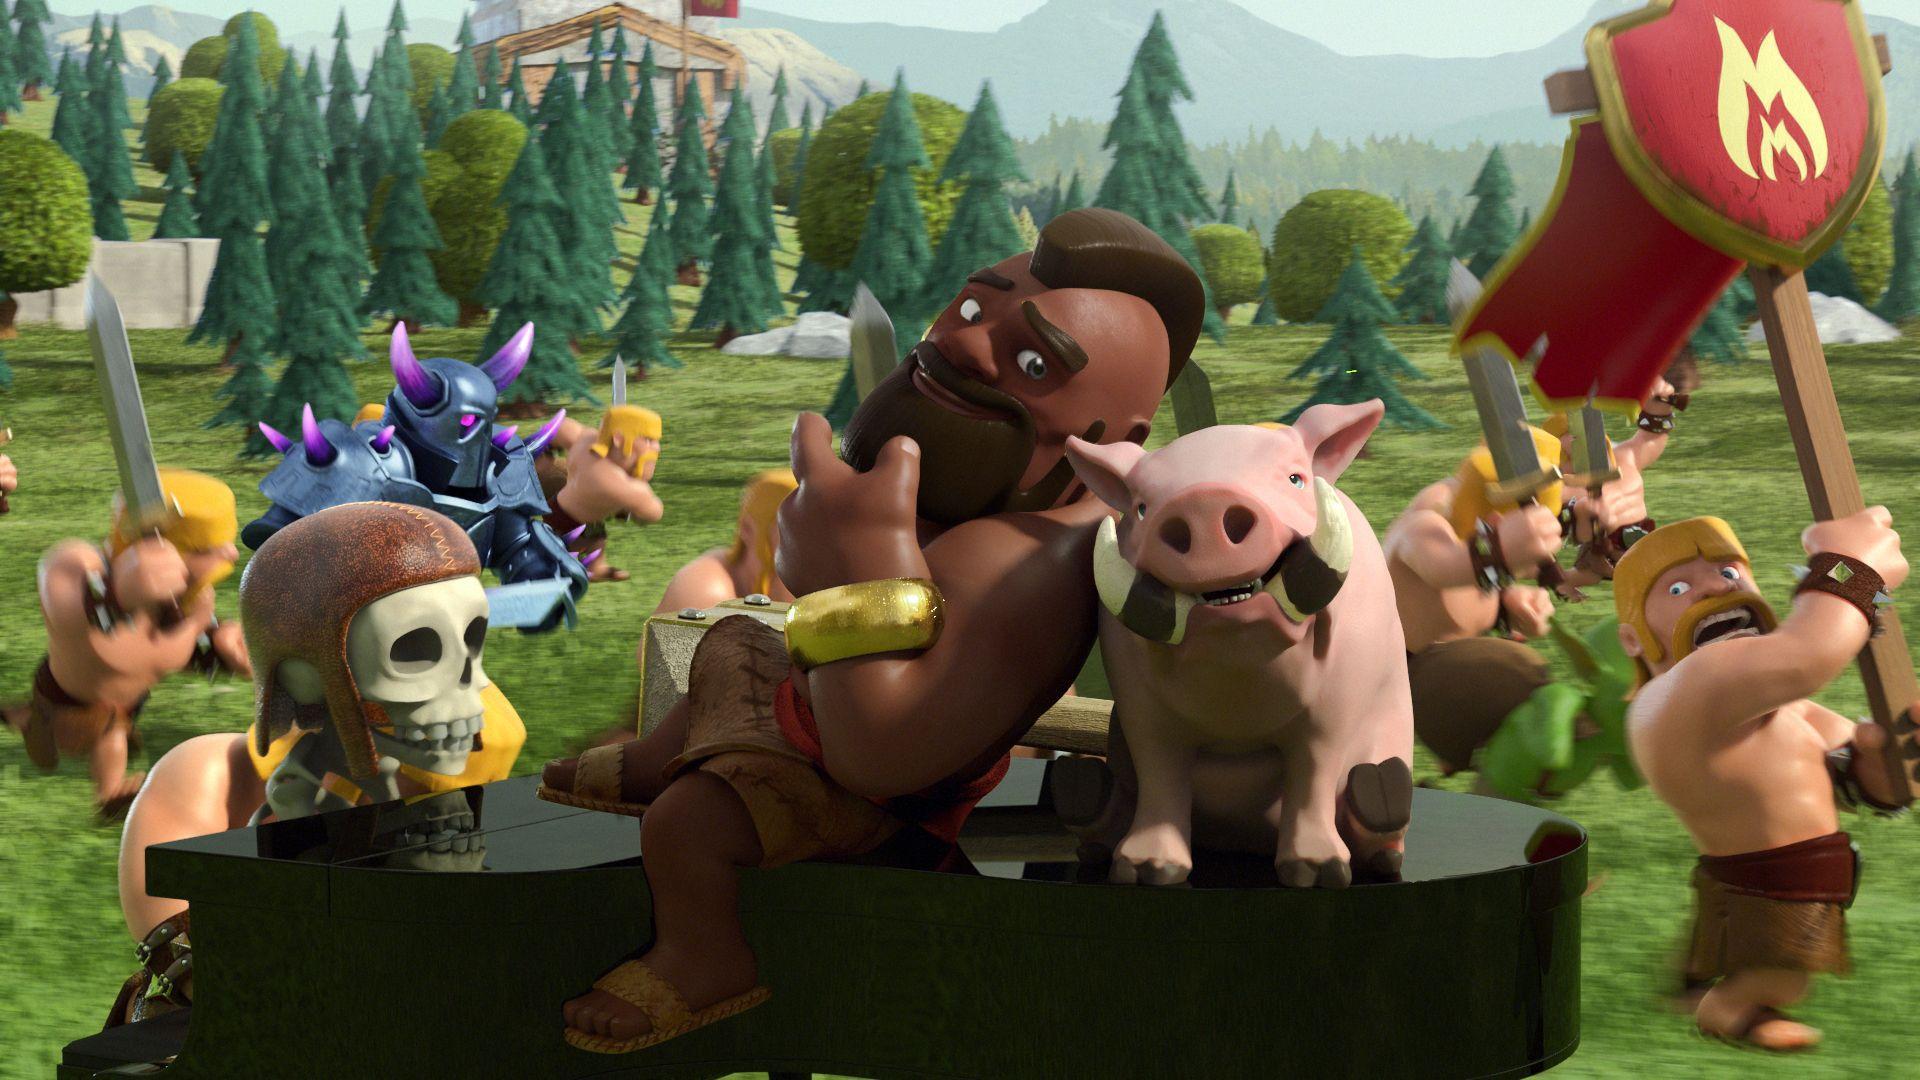 Funny Clash of Clans Wallpaper. Full HD Picture